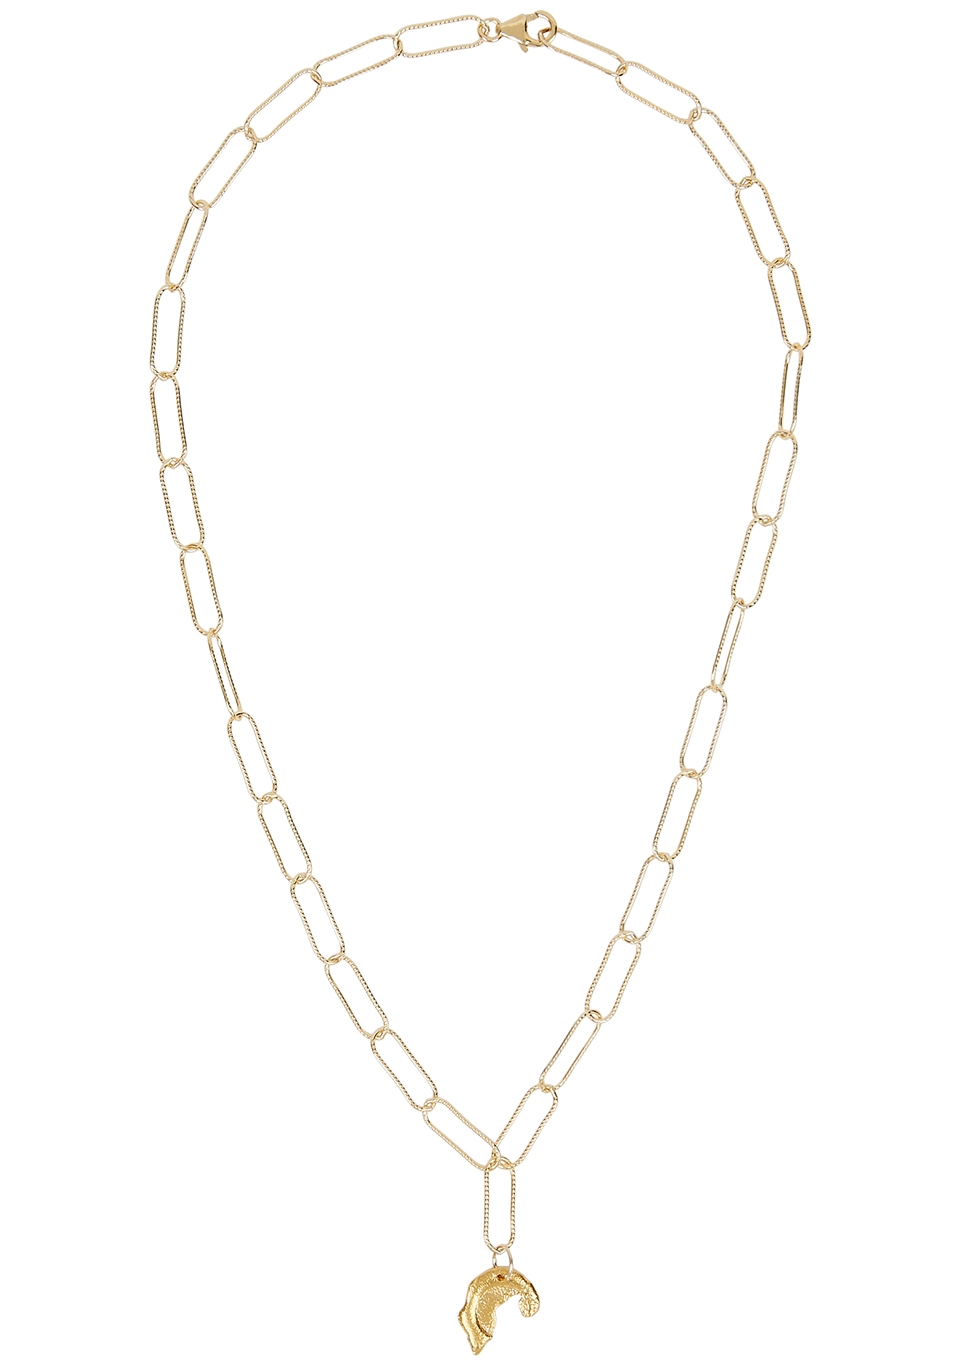 The Baby Odyssey 24kt gold-plated necklace